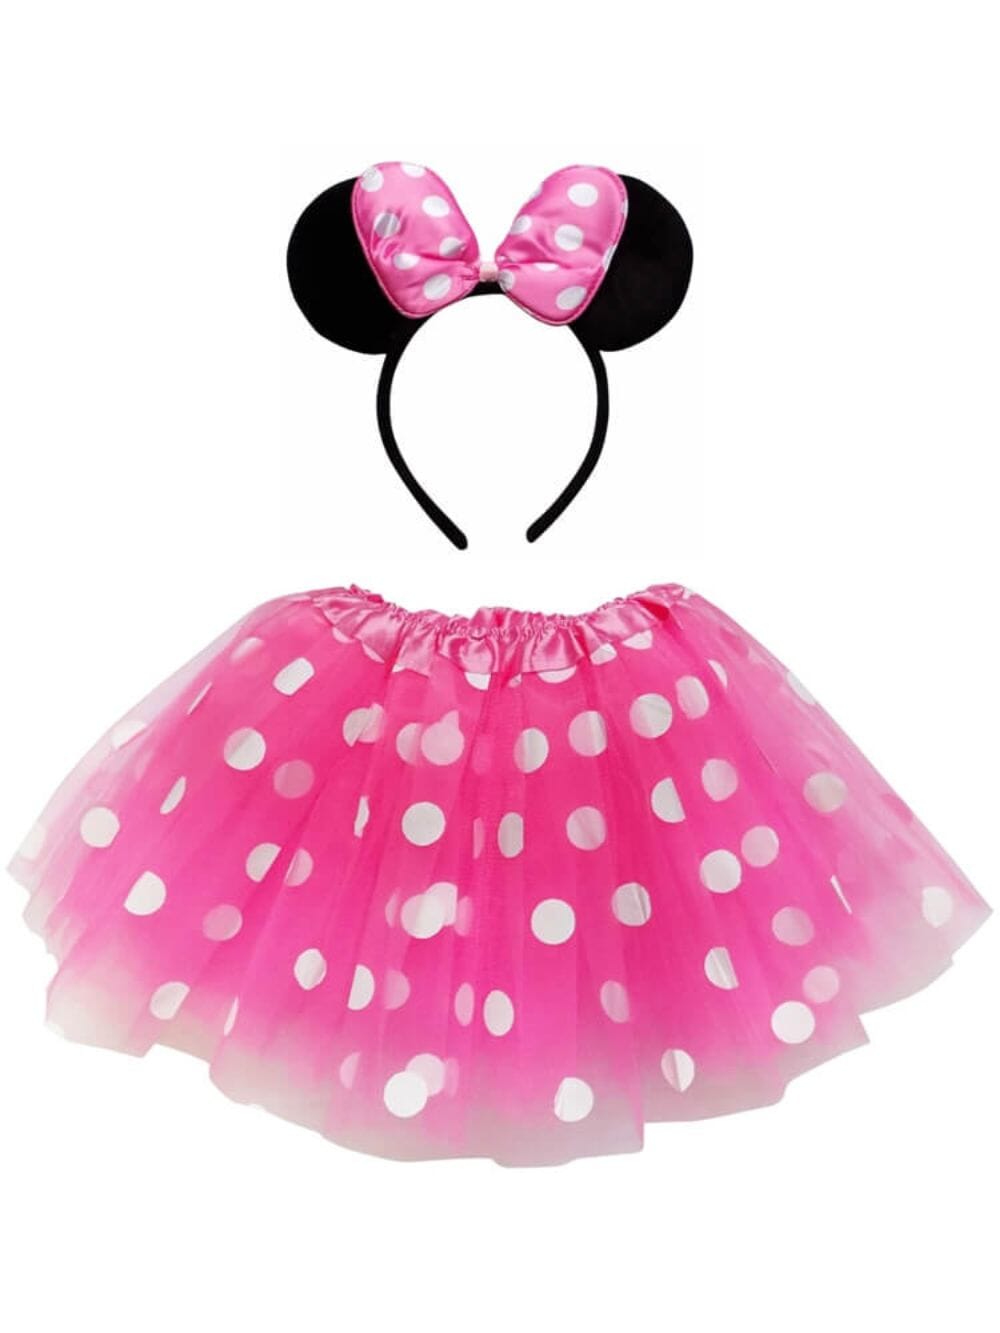 Adult Minnie Mouse Costume - Hot Pink Polka Dot Tutu Skirt & Headband Set for Adult or Plus Size - Sydney So Sweet